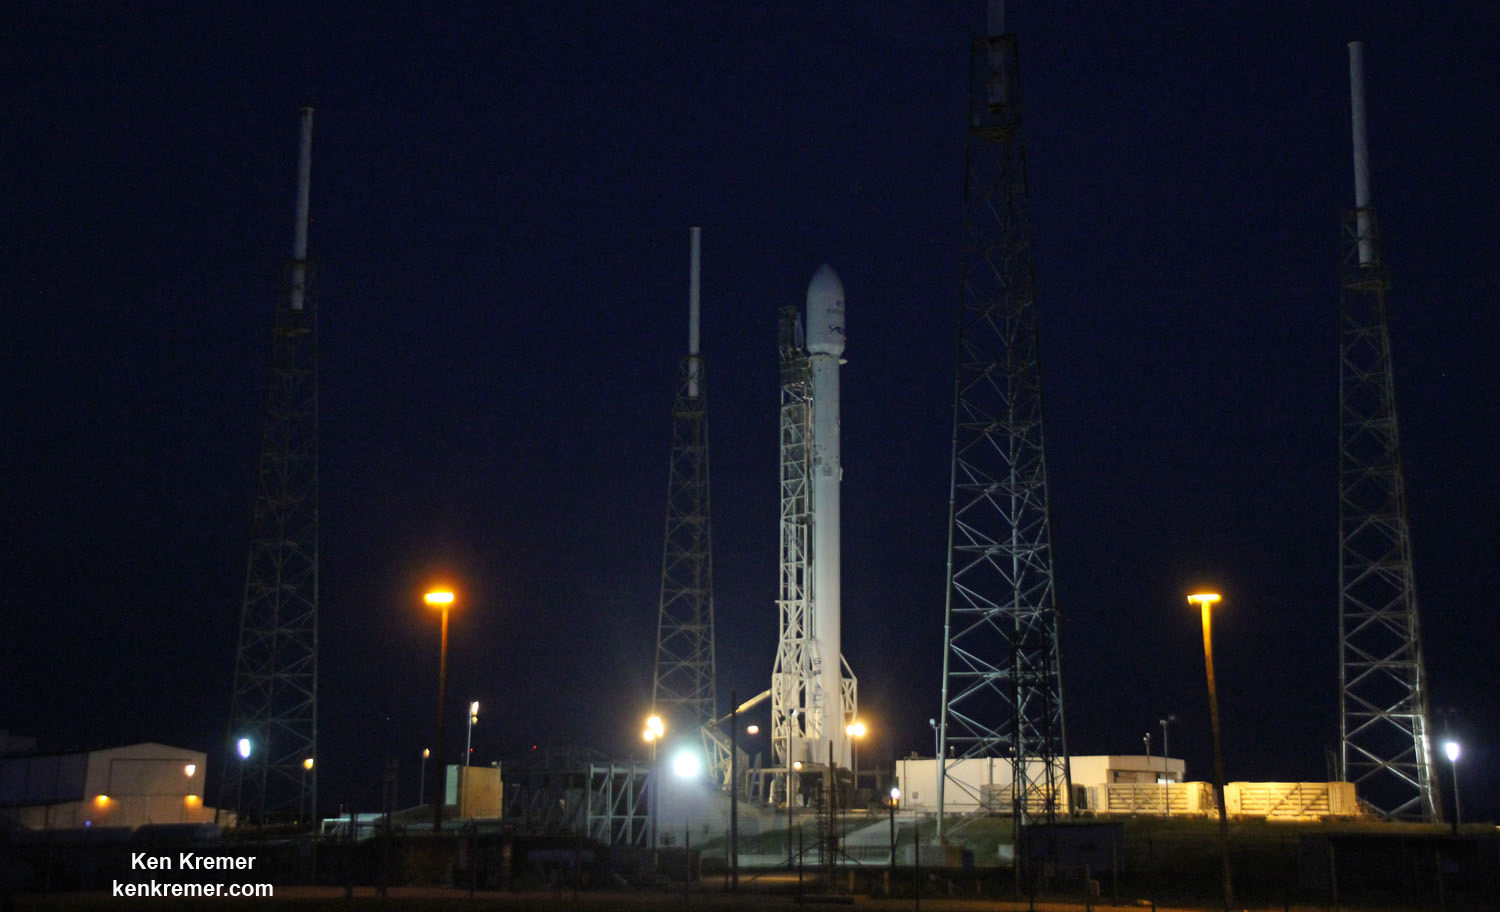 Predawn view of SpaceX Falcon 9 and Eutelsat/ABS 2A comsats pn the morning of launch on June 15, 2016 from Space Launch Complex 40 on Cape Canaveral Air Force Station, Fl.   Credit: Ken Kremer/kenkremer.com